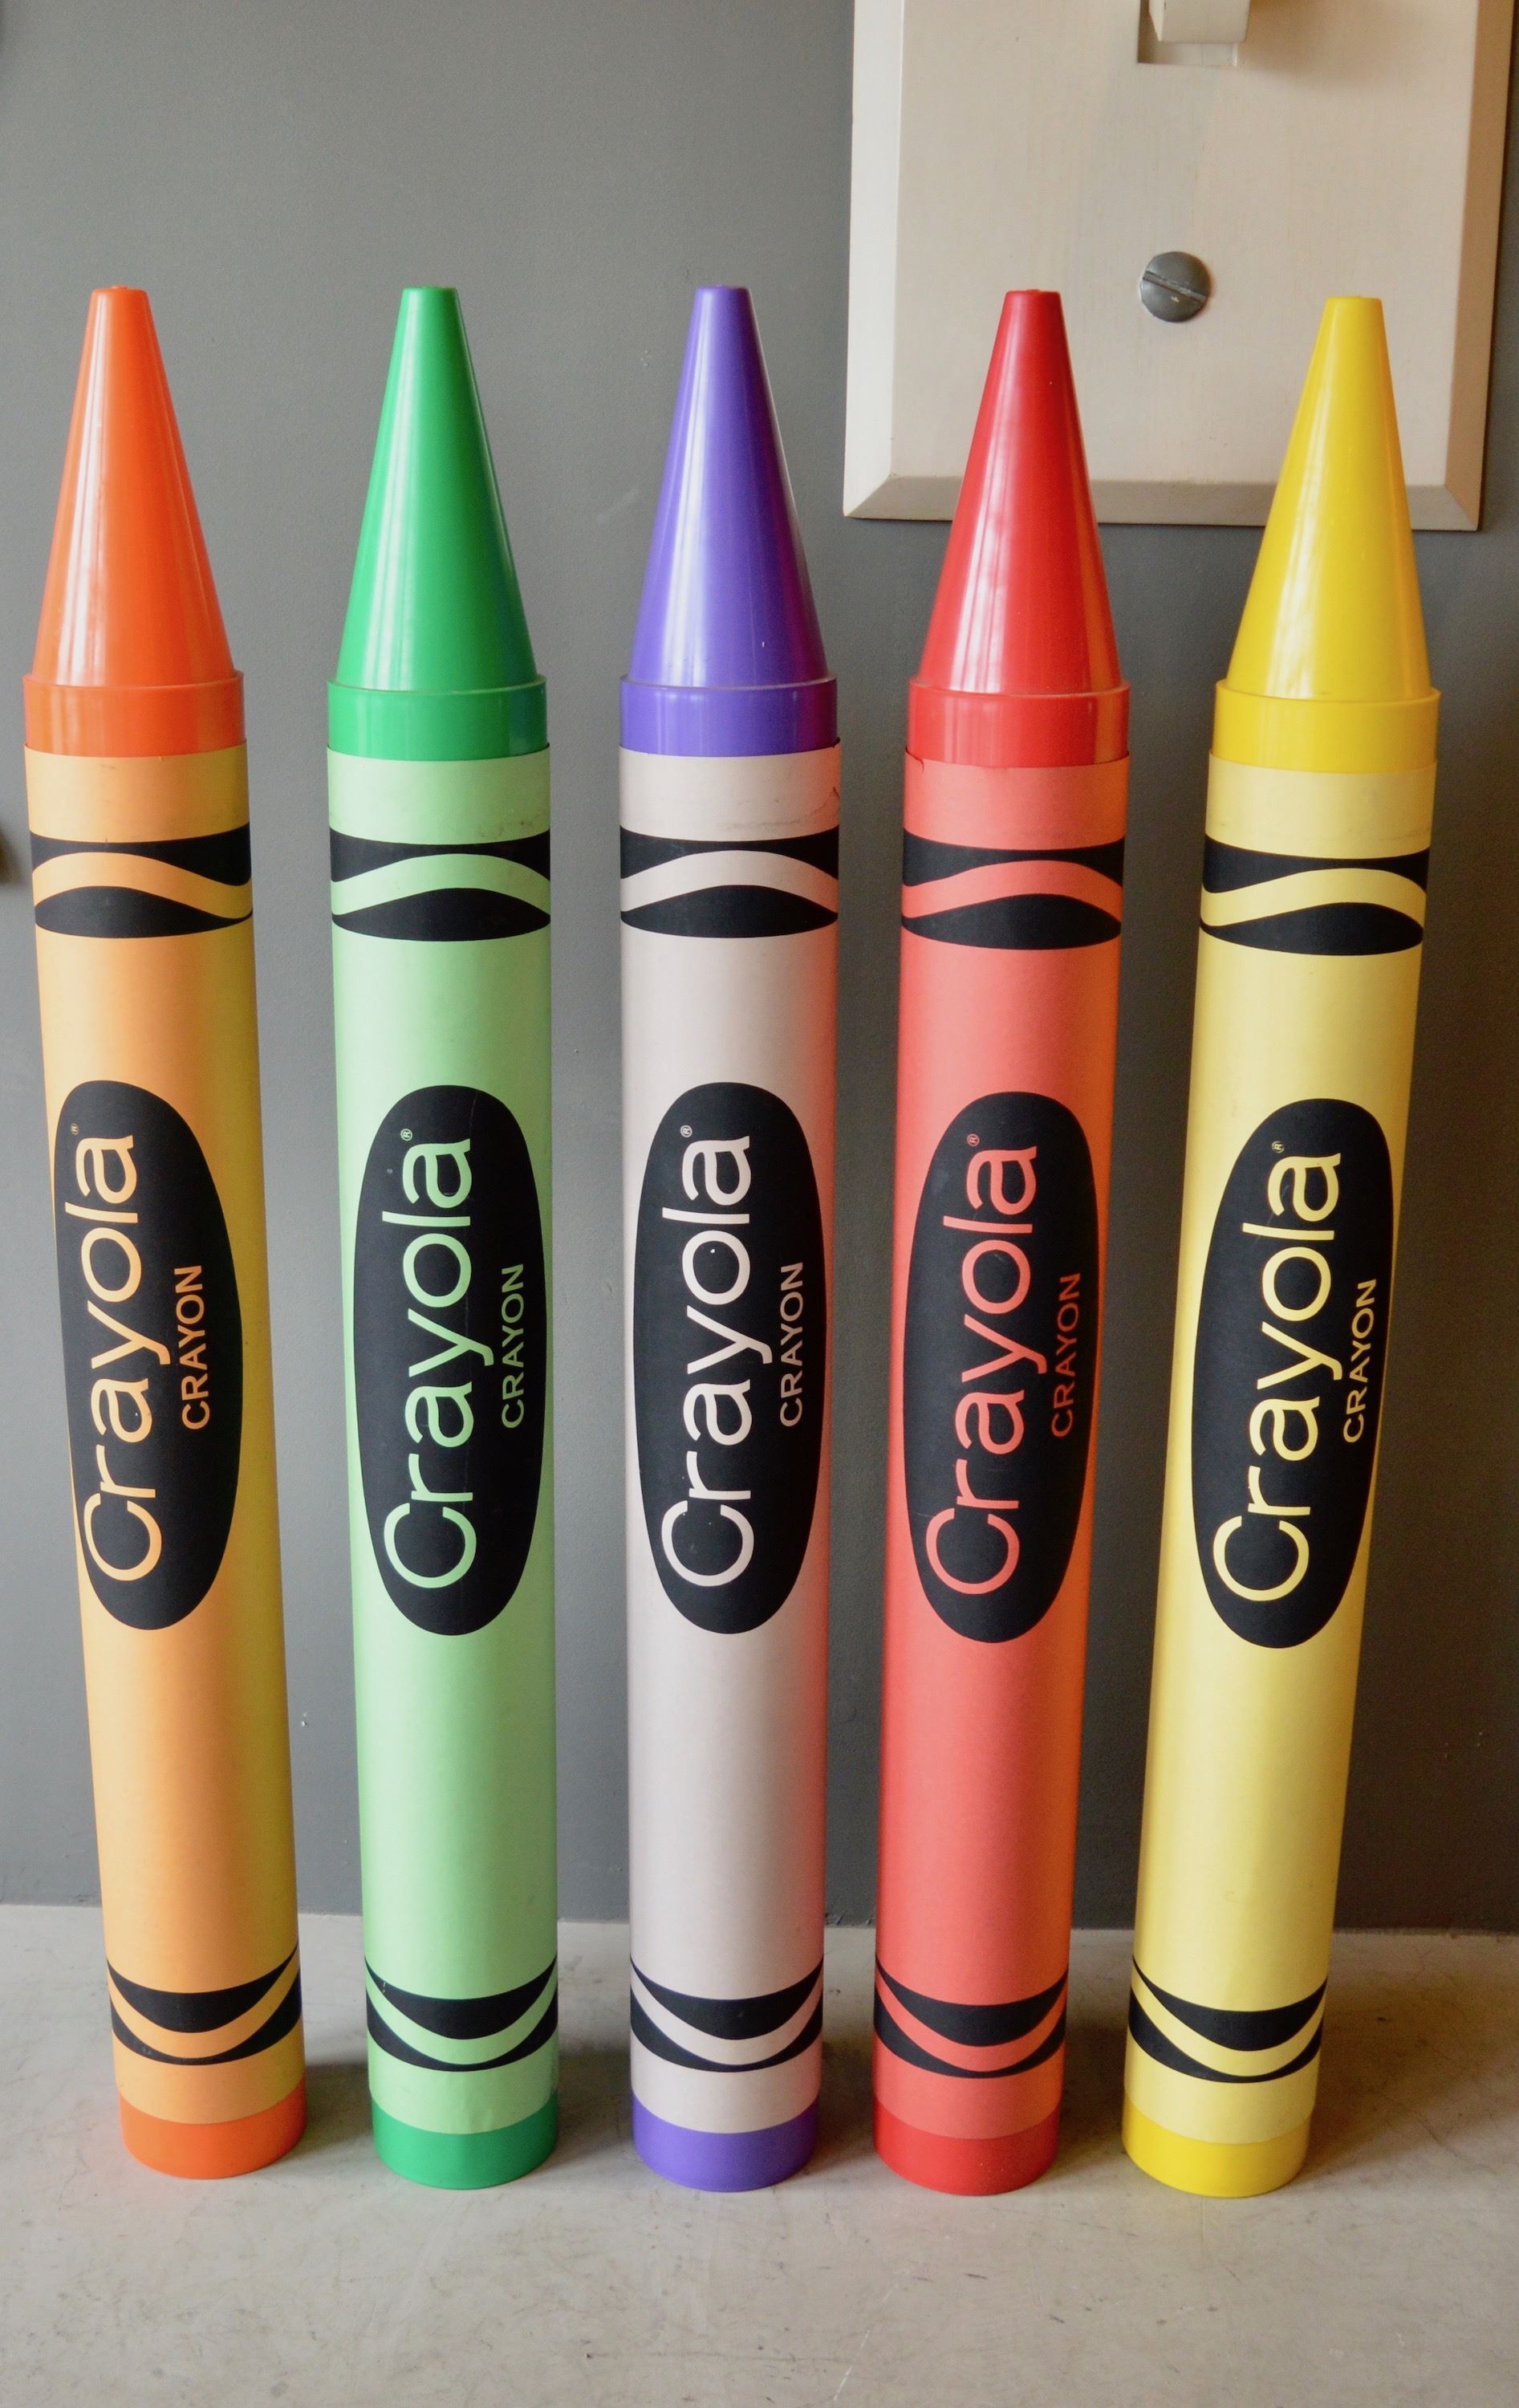 Vintage Crayola Crayons! 30+ Years old. 1980's vs 2020 - Which Are Better?  